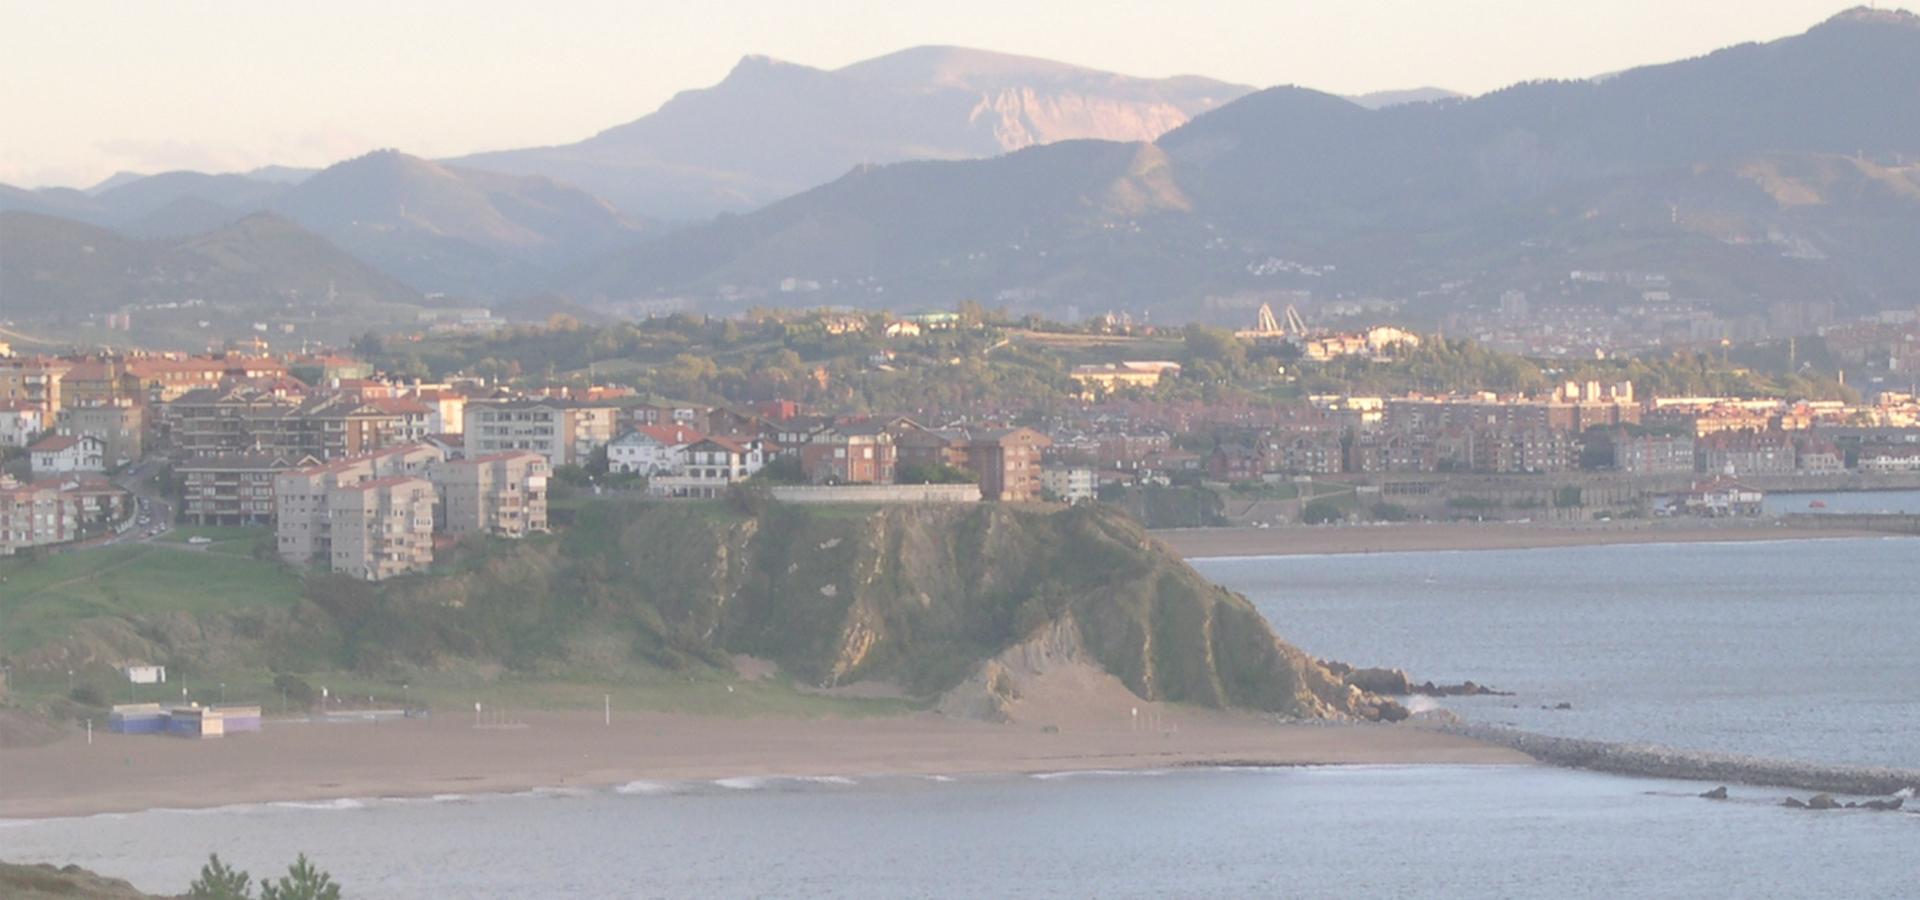 <b>Getxo, Province of Biscay, Basque Country, Spain</b>